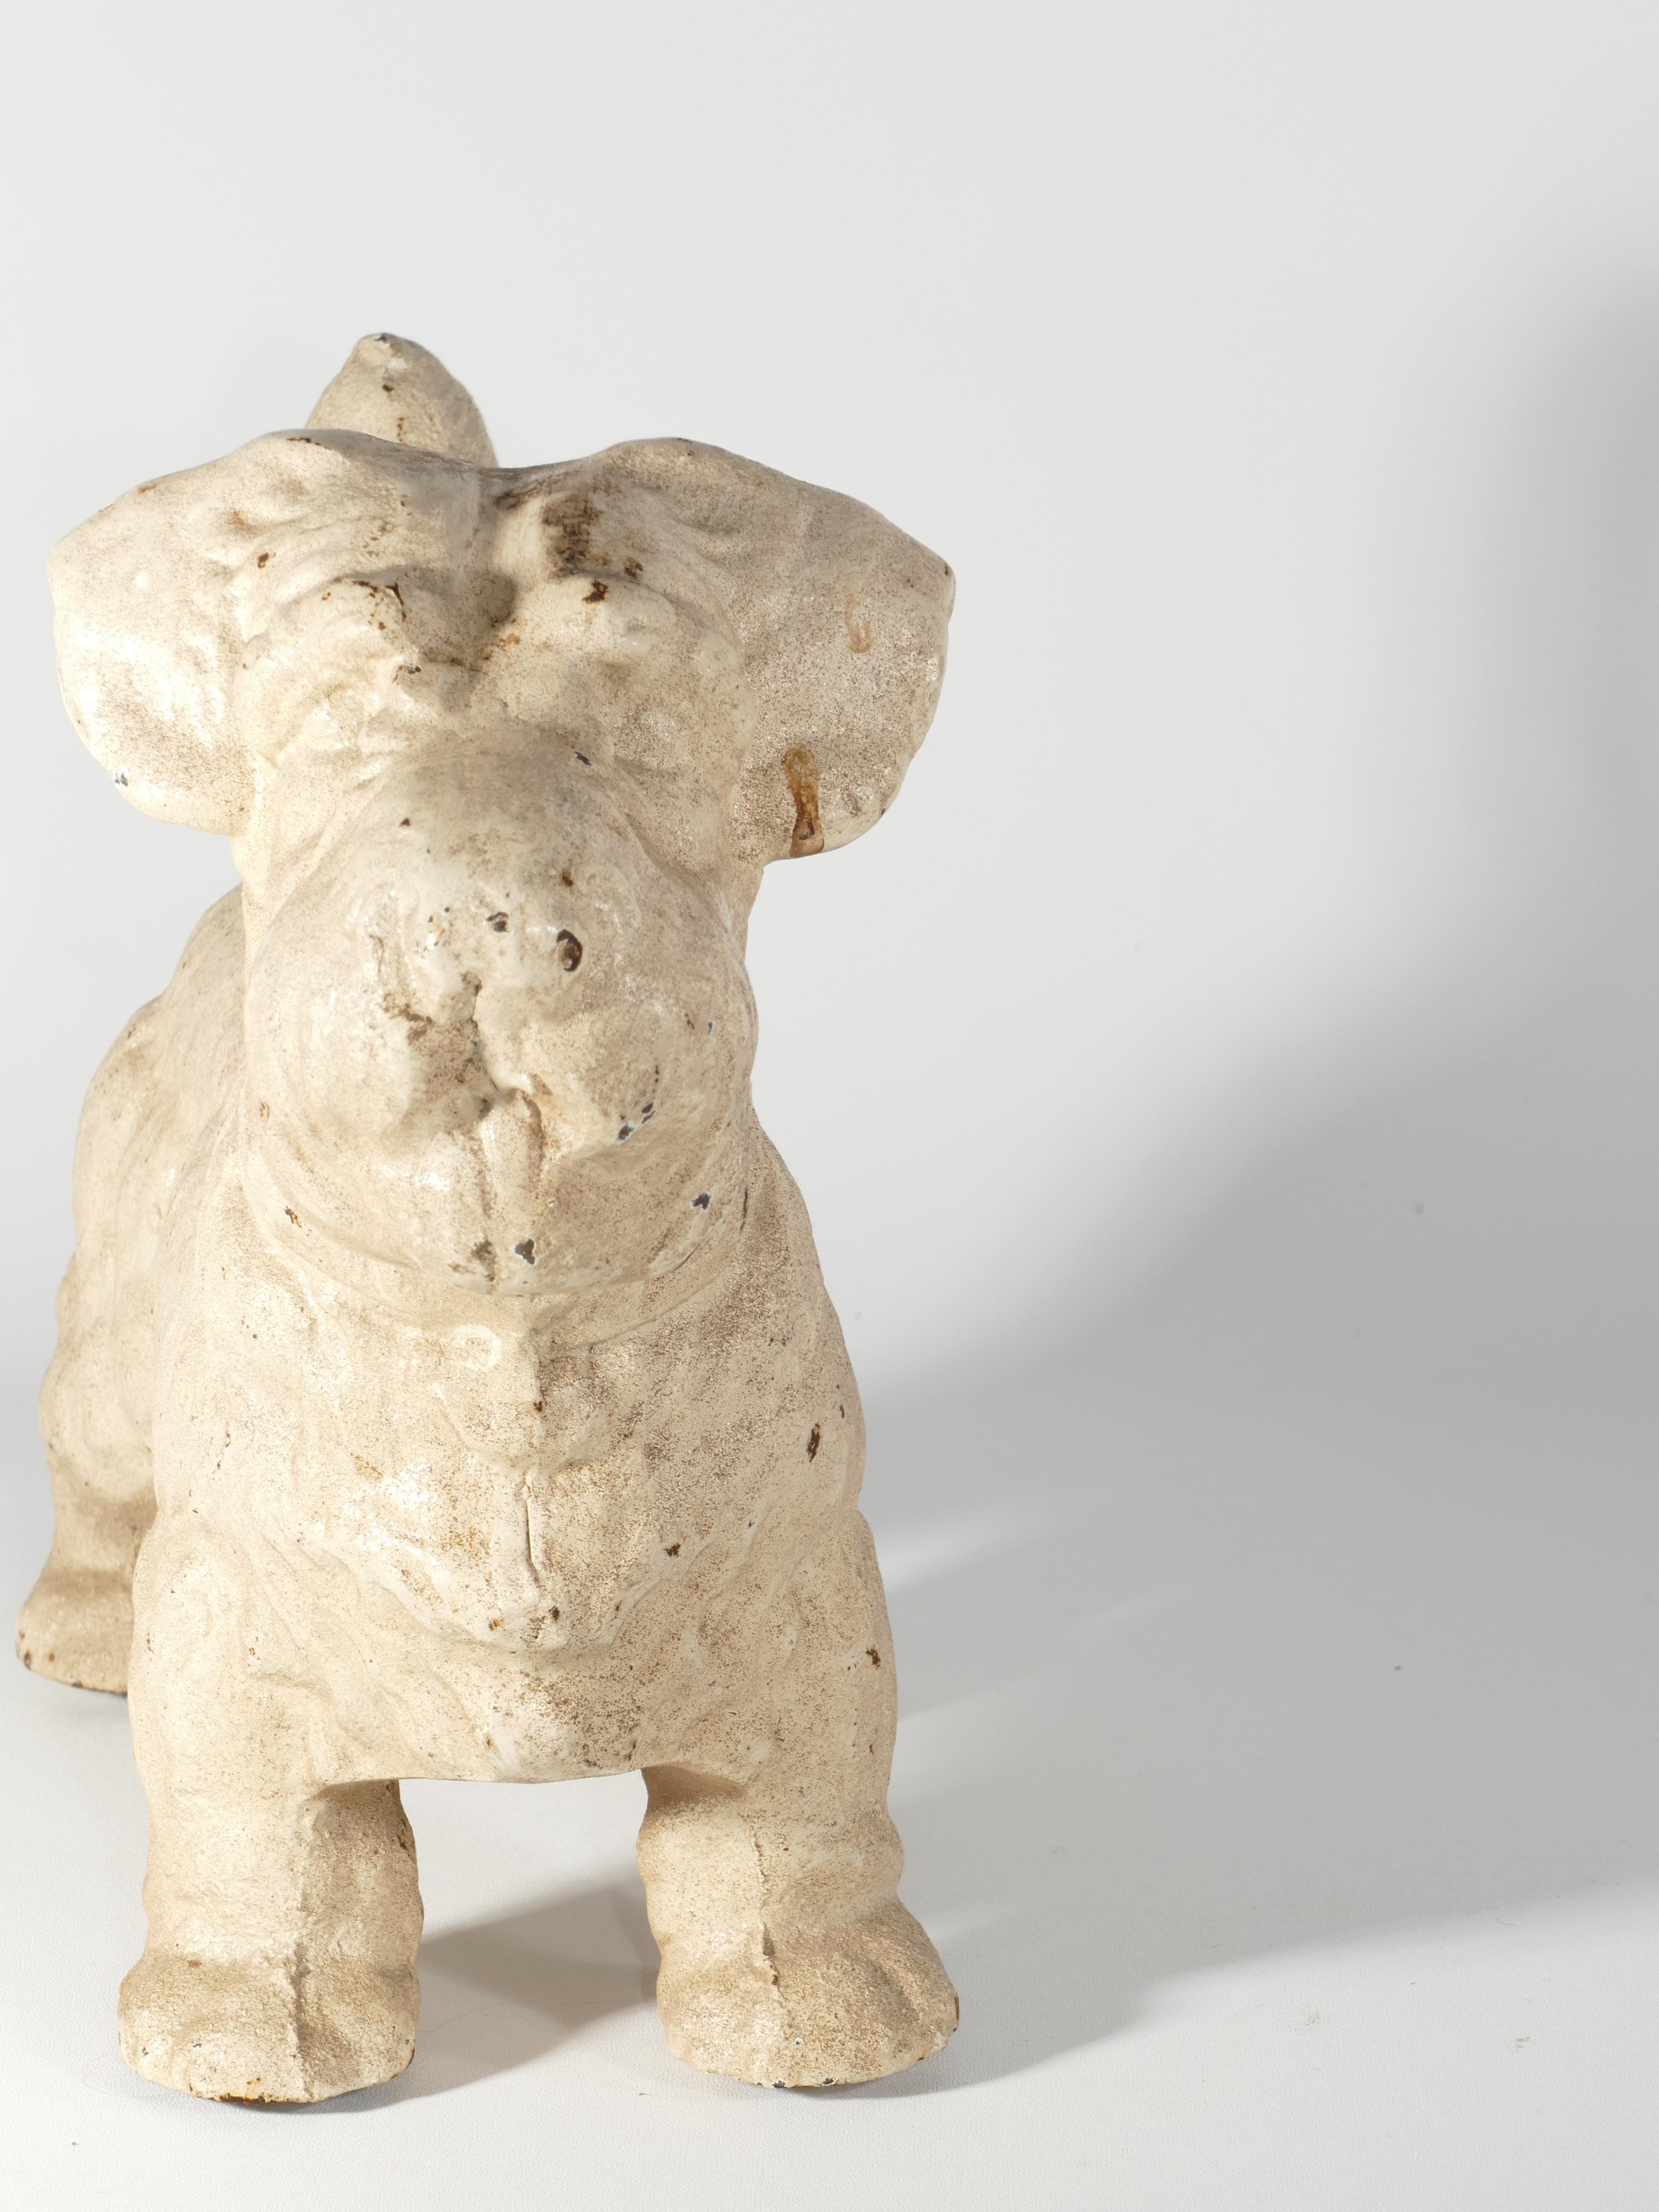 Crafted from durable cast iron, this charming Sealyham Terrier doorstop or sculpture by  Hubley is a delightful addition for any dog enthusiast. With a weight of approximately 7.5kg, it's both sturdy and versatile, suitable for enhancing the decor